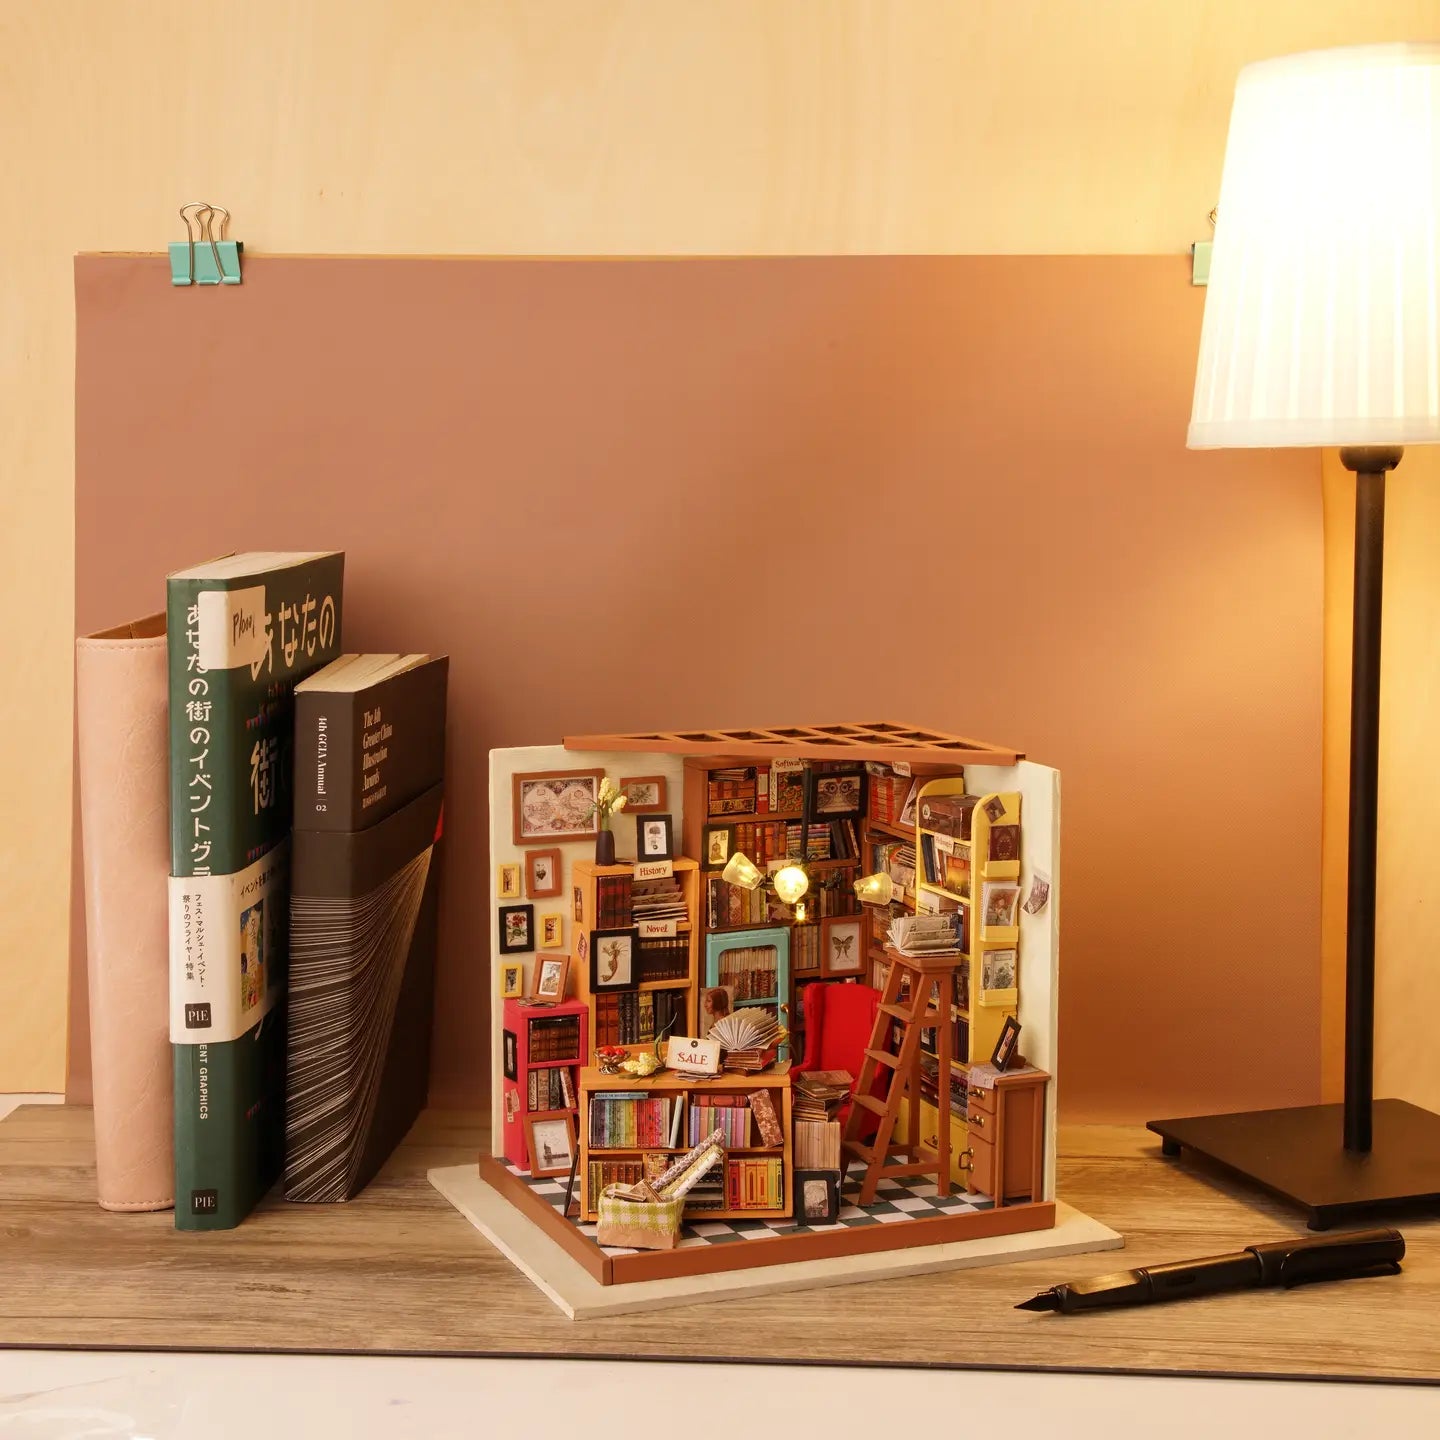 A miniature dollhouse featuring a bookcase, ladder, and lamp. Sam's Study Rolife Library Diy Miniature Dollhouse offers magical services in a cozy setting. Dimensions: 8.3 x 5.2 x 6.9 in.